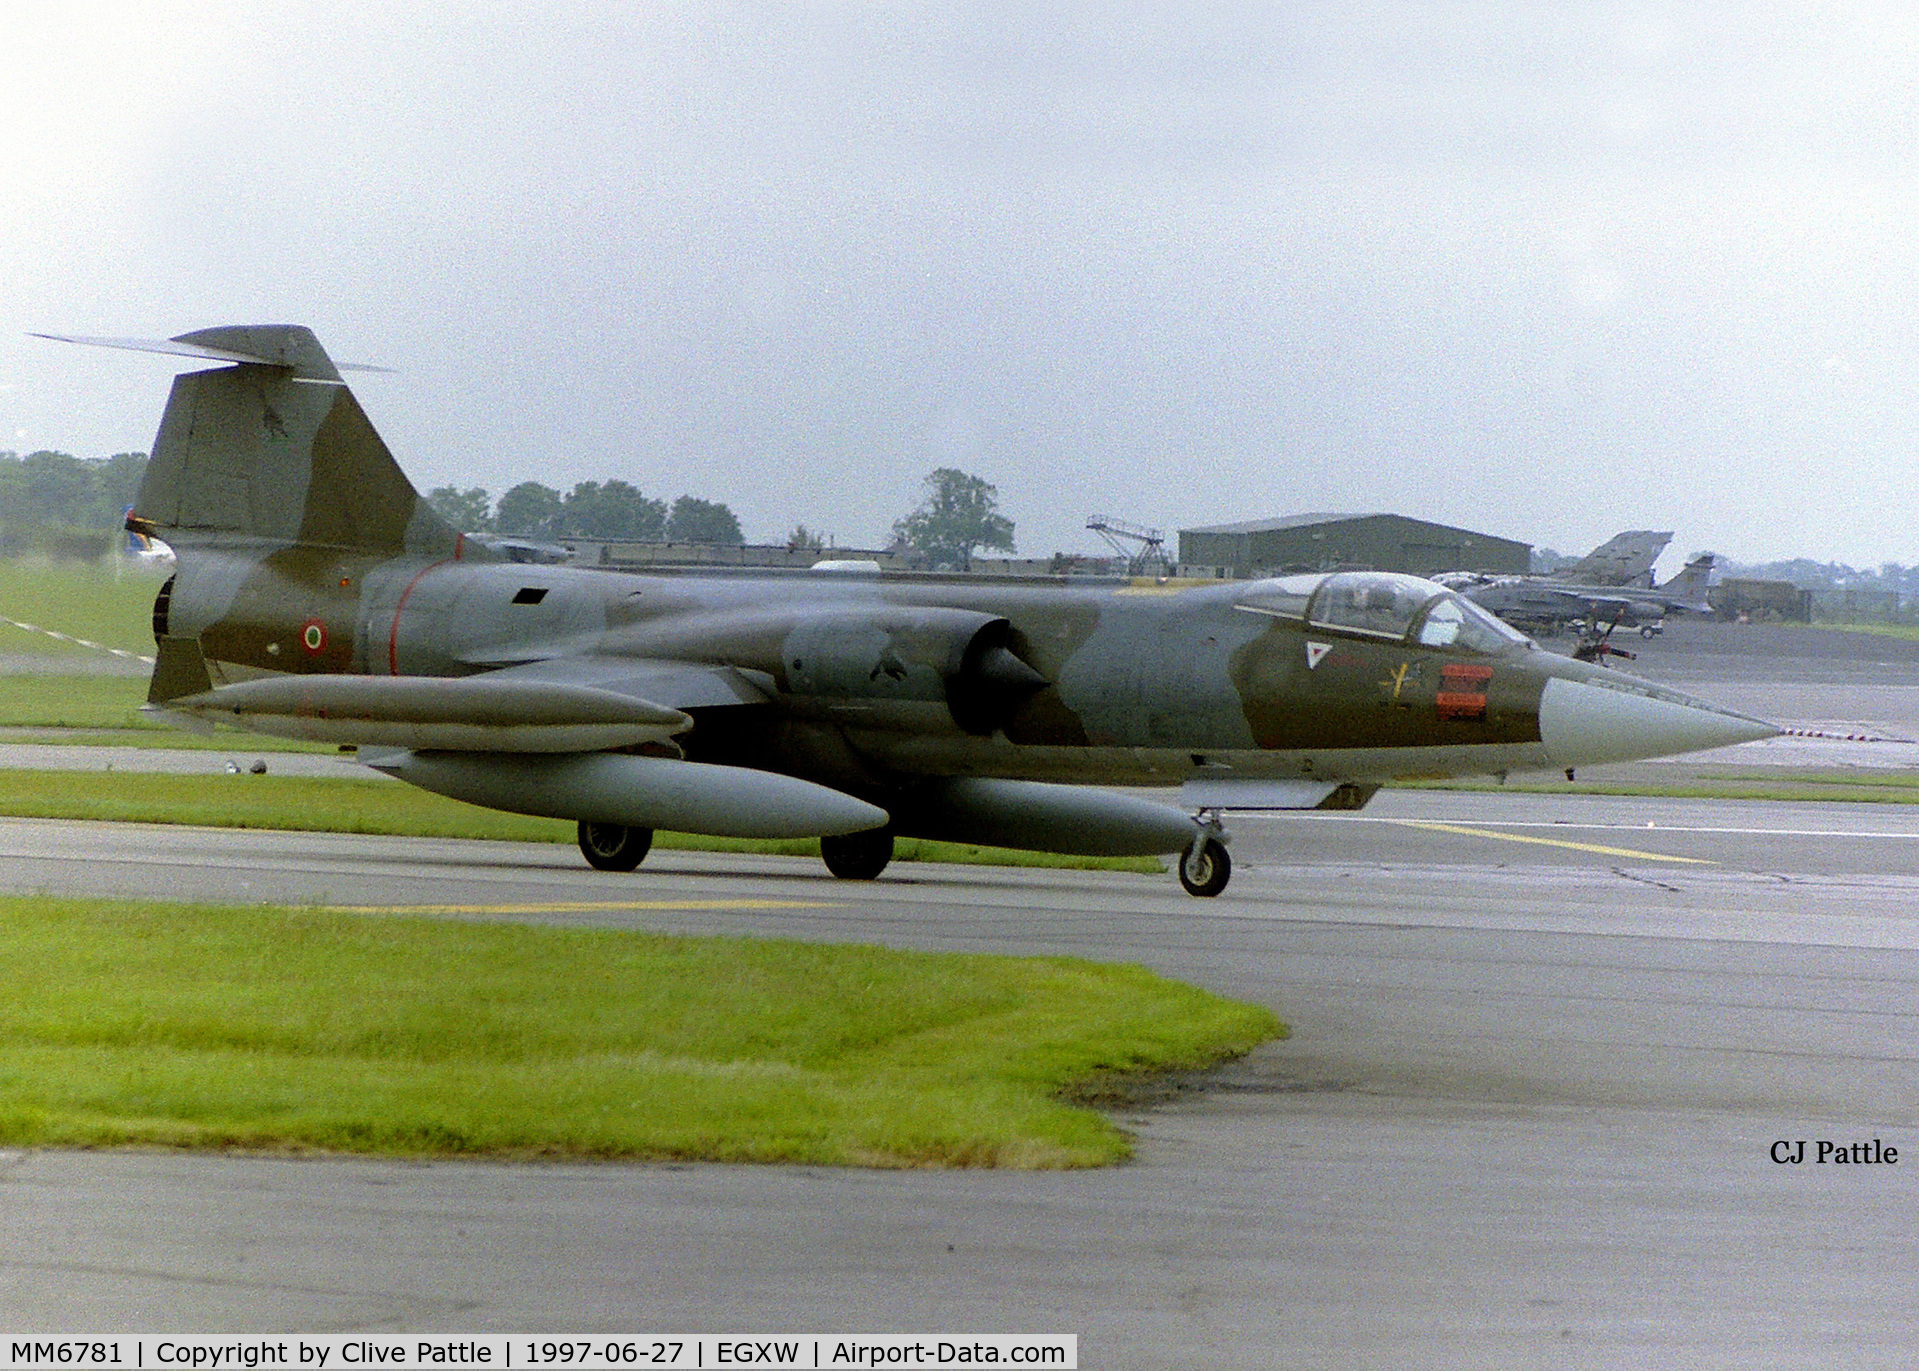 MM6781, Aeritalia F-104S-ASA Starfighter C/N 1081, Taxy to static display area at Waddington for the airshow 1997